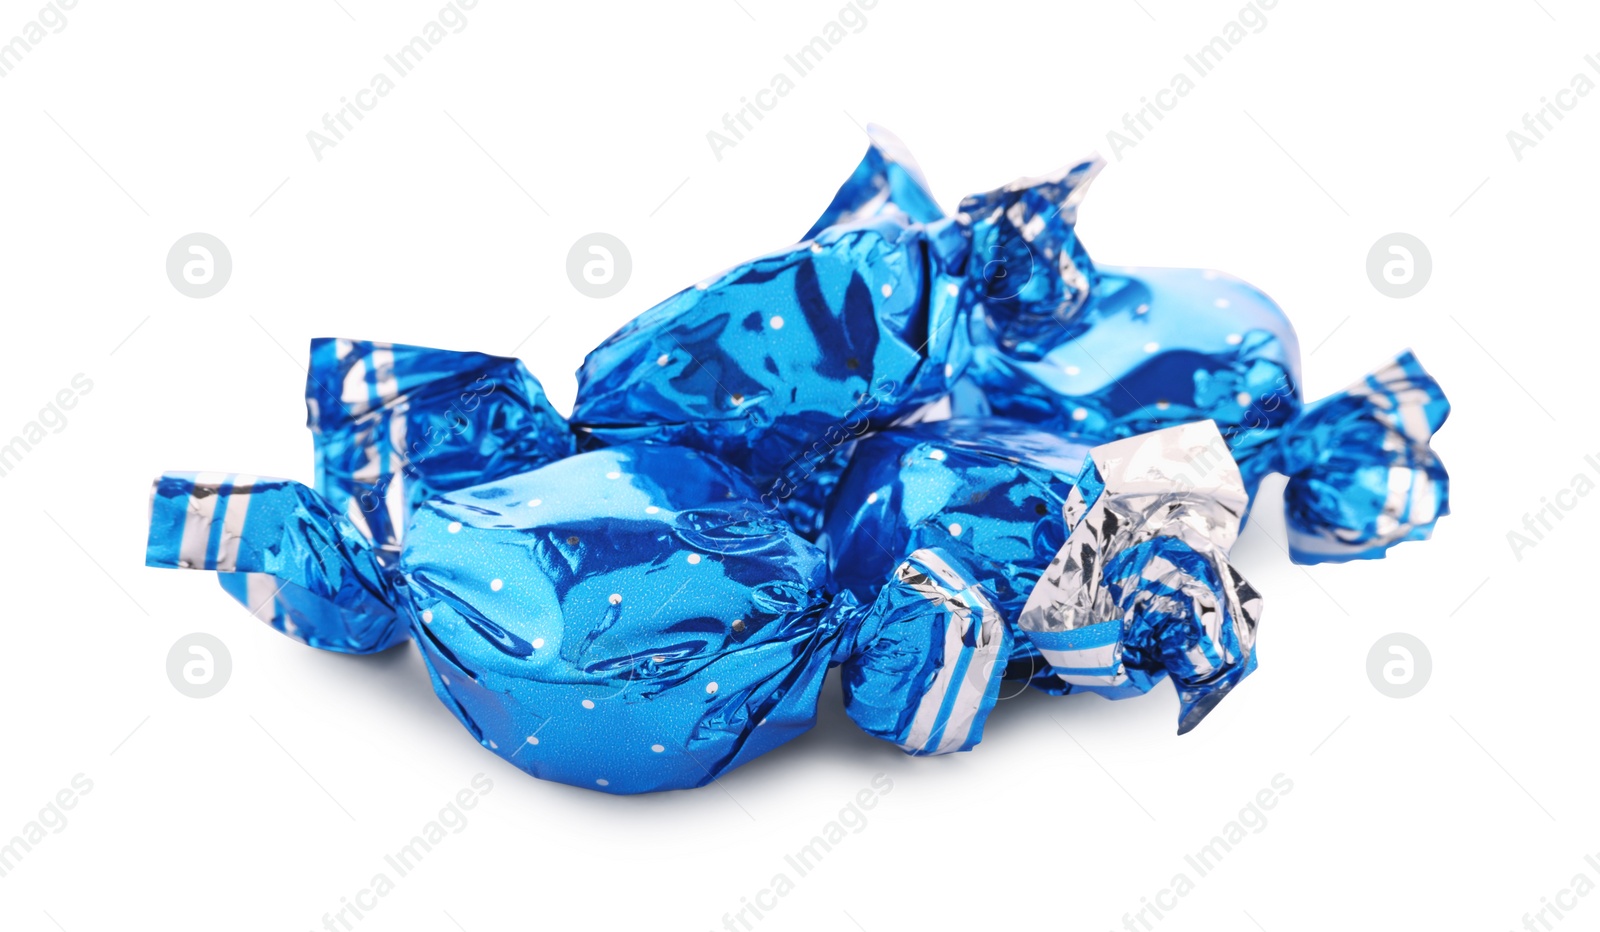 Photo of Candies in light blue wrappers isolated on white